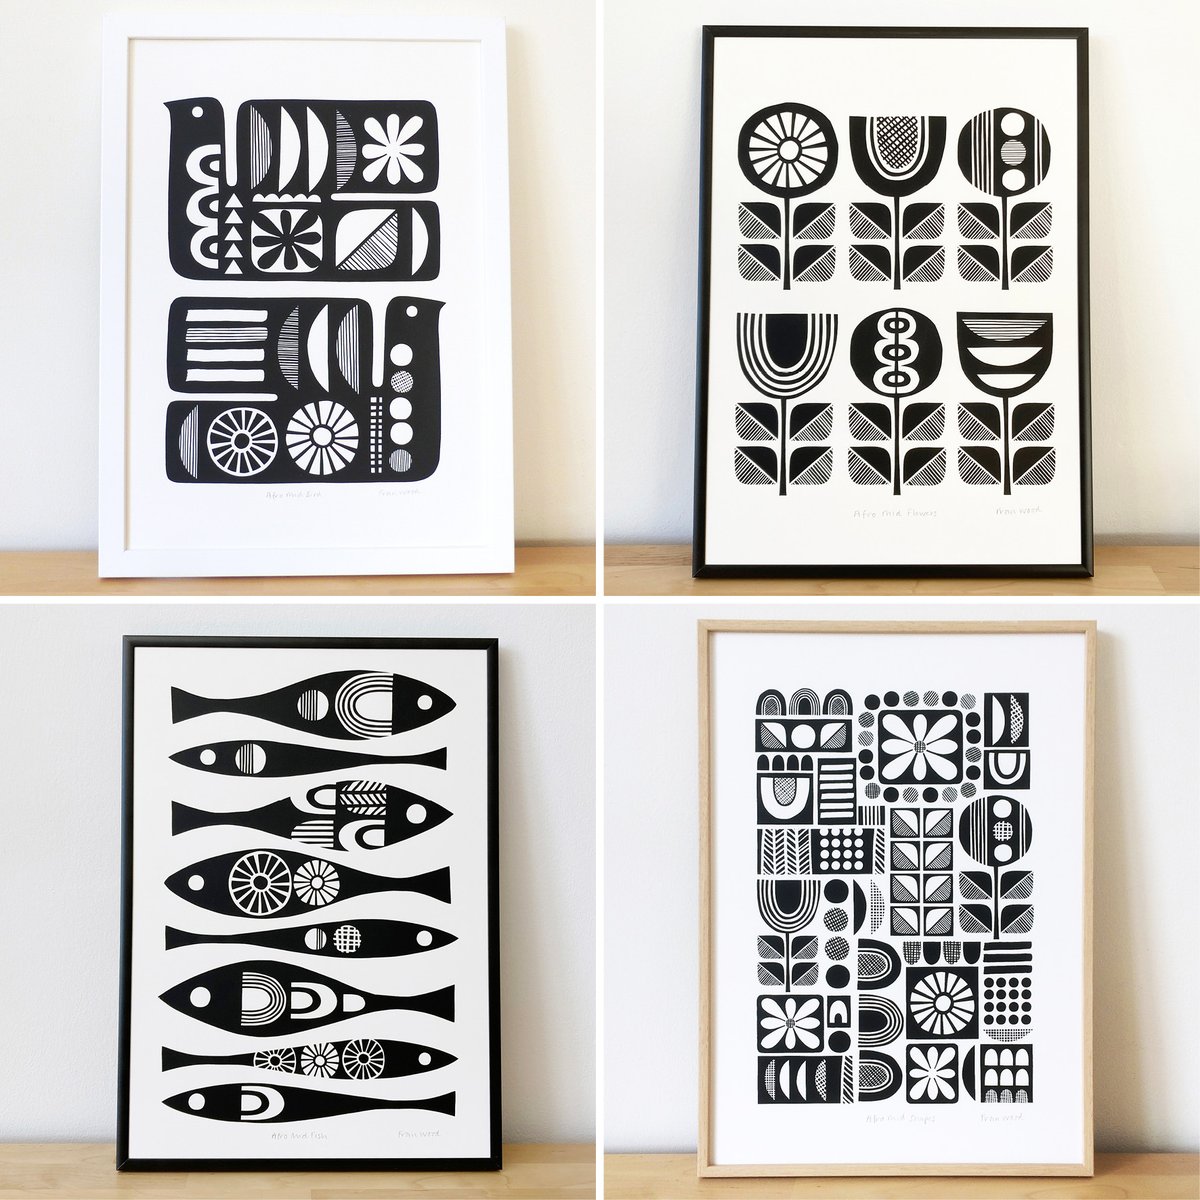 Monochrome hand-pulled screen-prints inspired by African patterns and mid-century design. These are available in my online shop, I’ll also have them on my stall @illustratorsfair on 9th December and @craftyfoxmarket on the 17th December, both in Kings Cross.
#shopindie